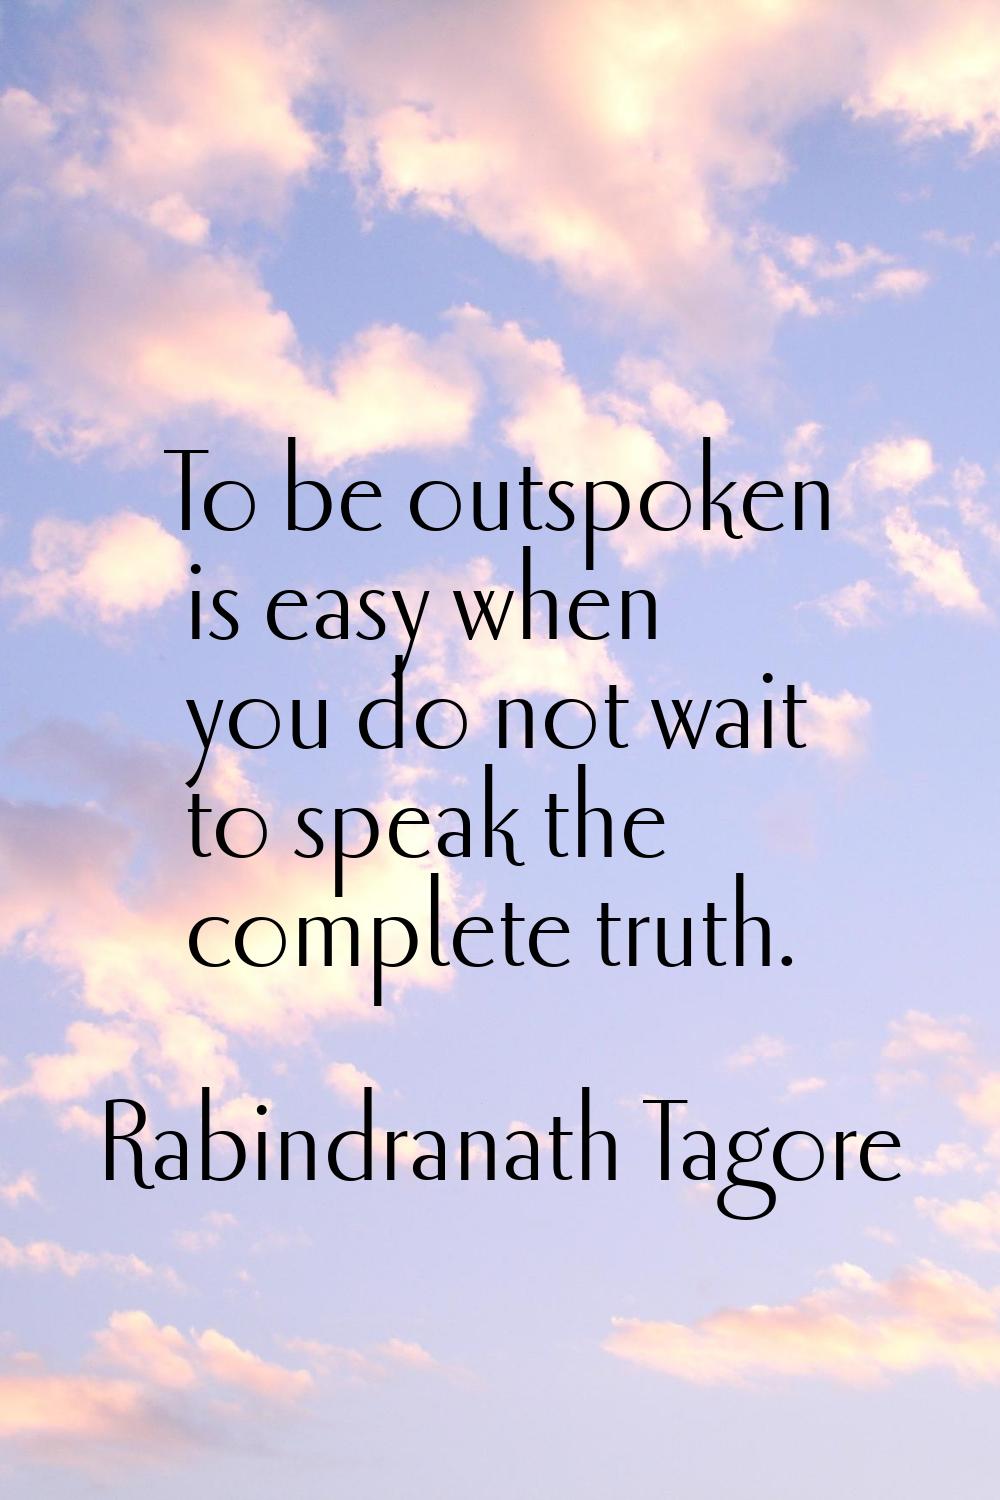 To be outspoken is easy when you do not wait to speak the complete truth.